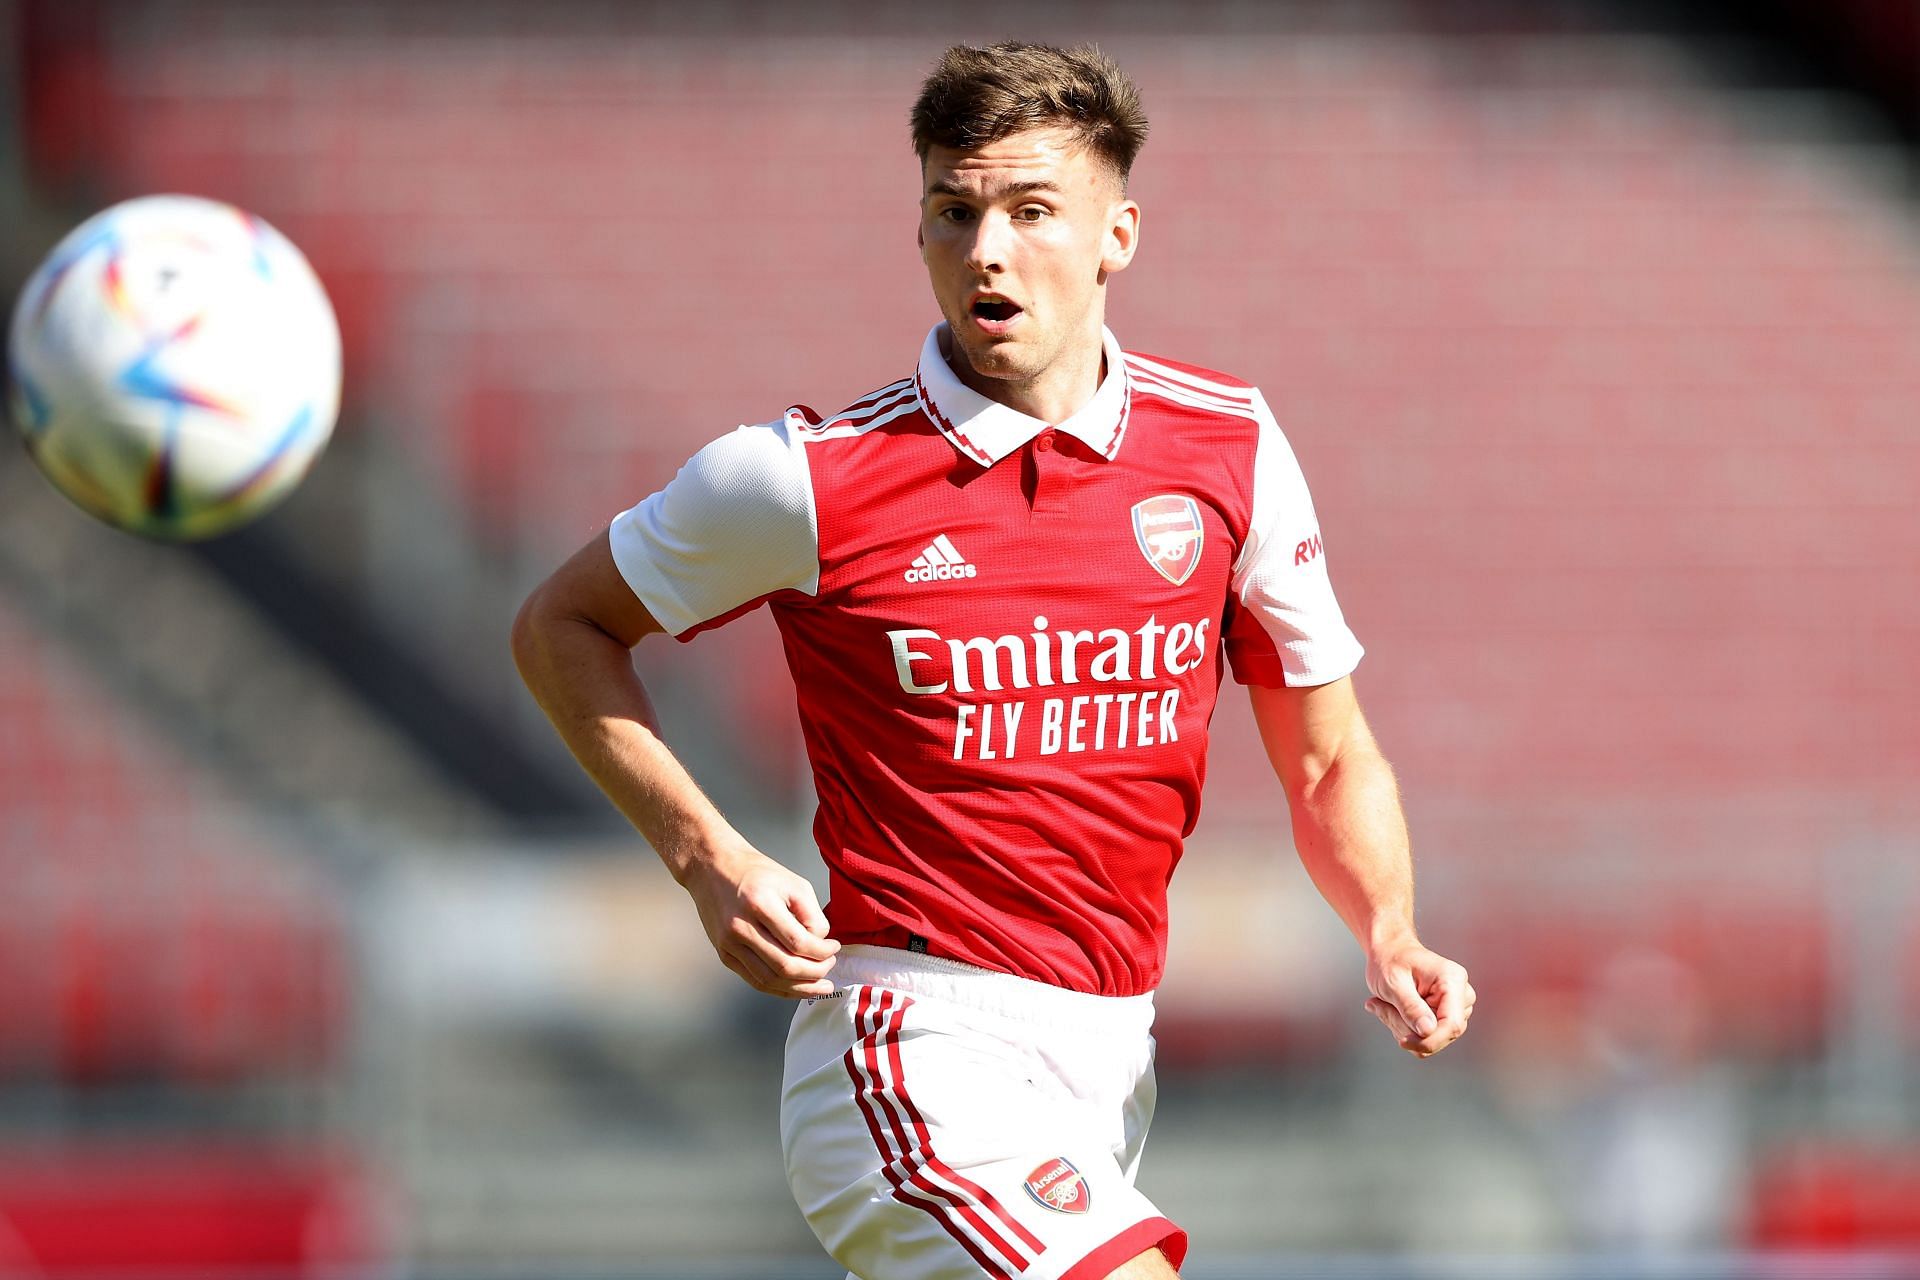 Tierney in action in the preseason for Arsenal.